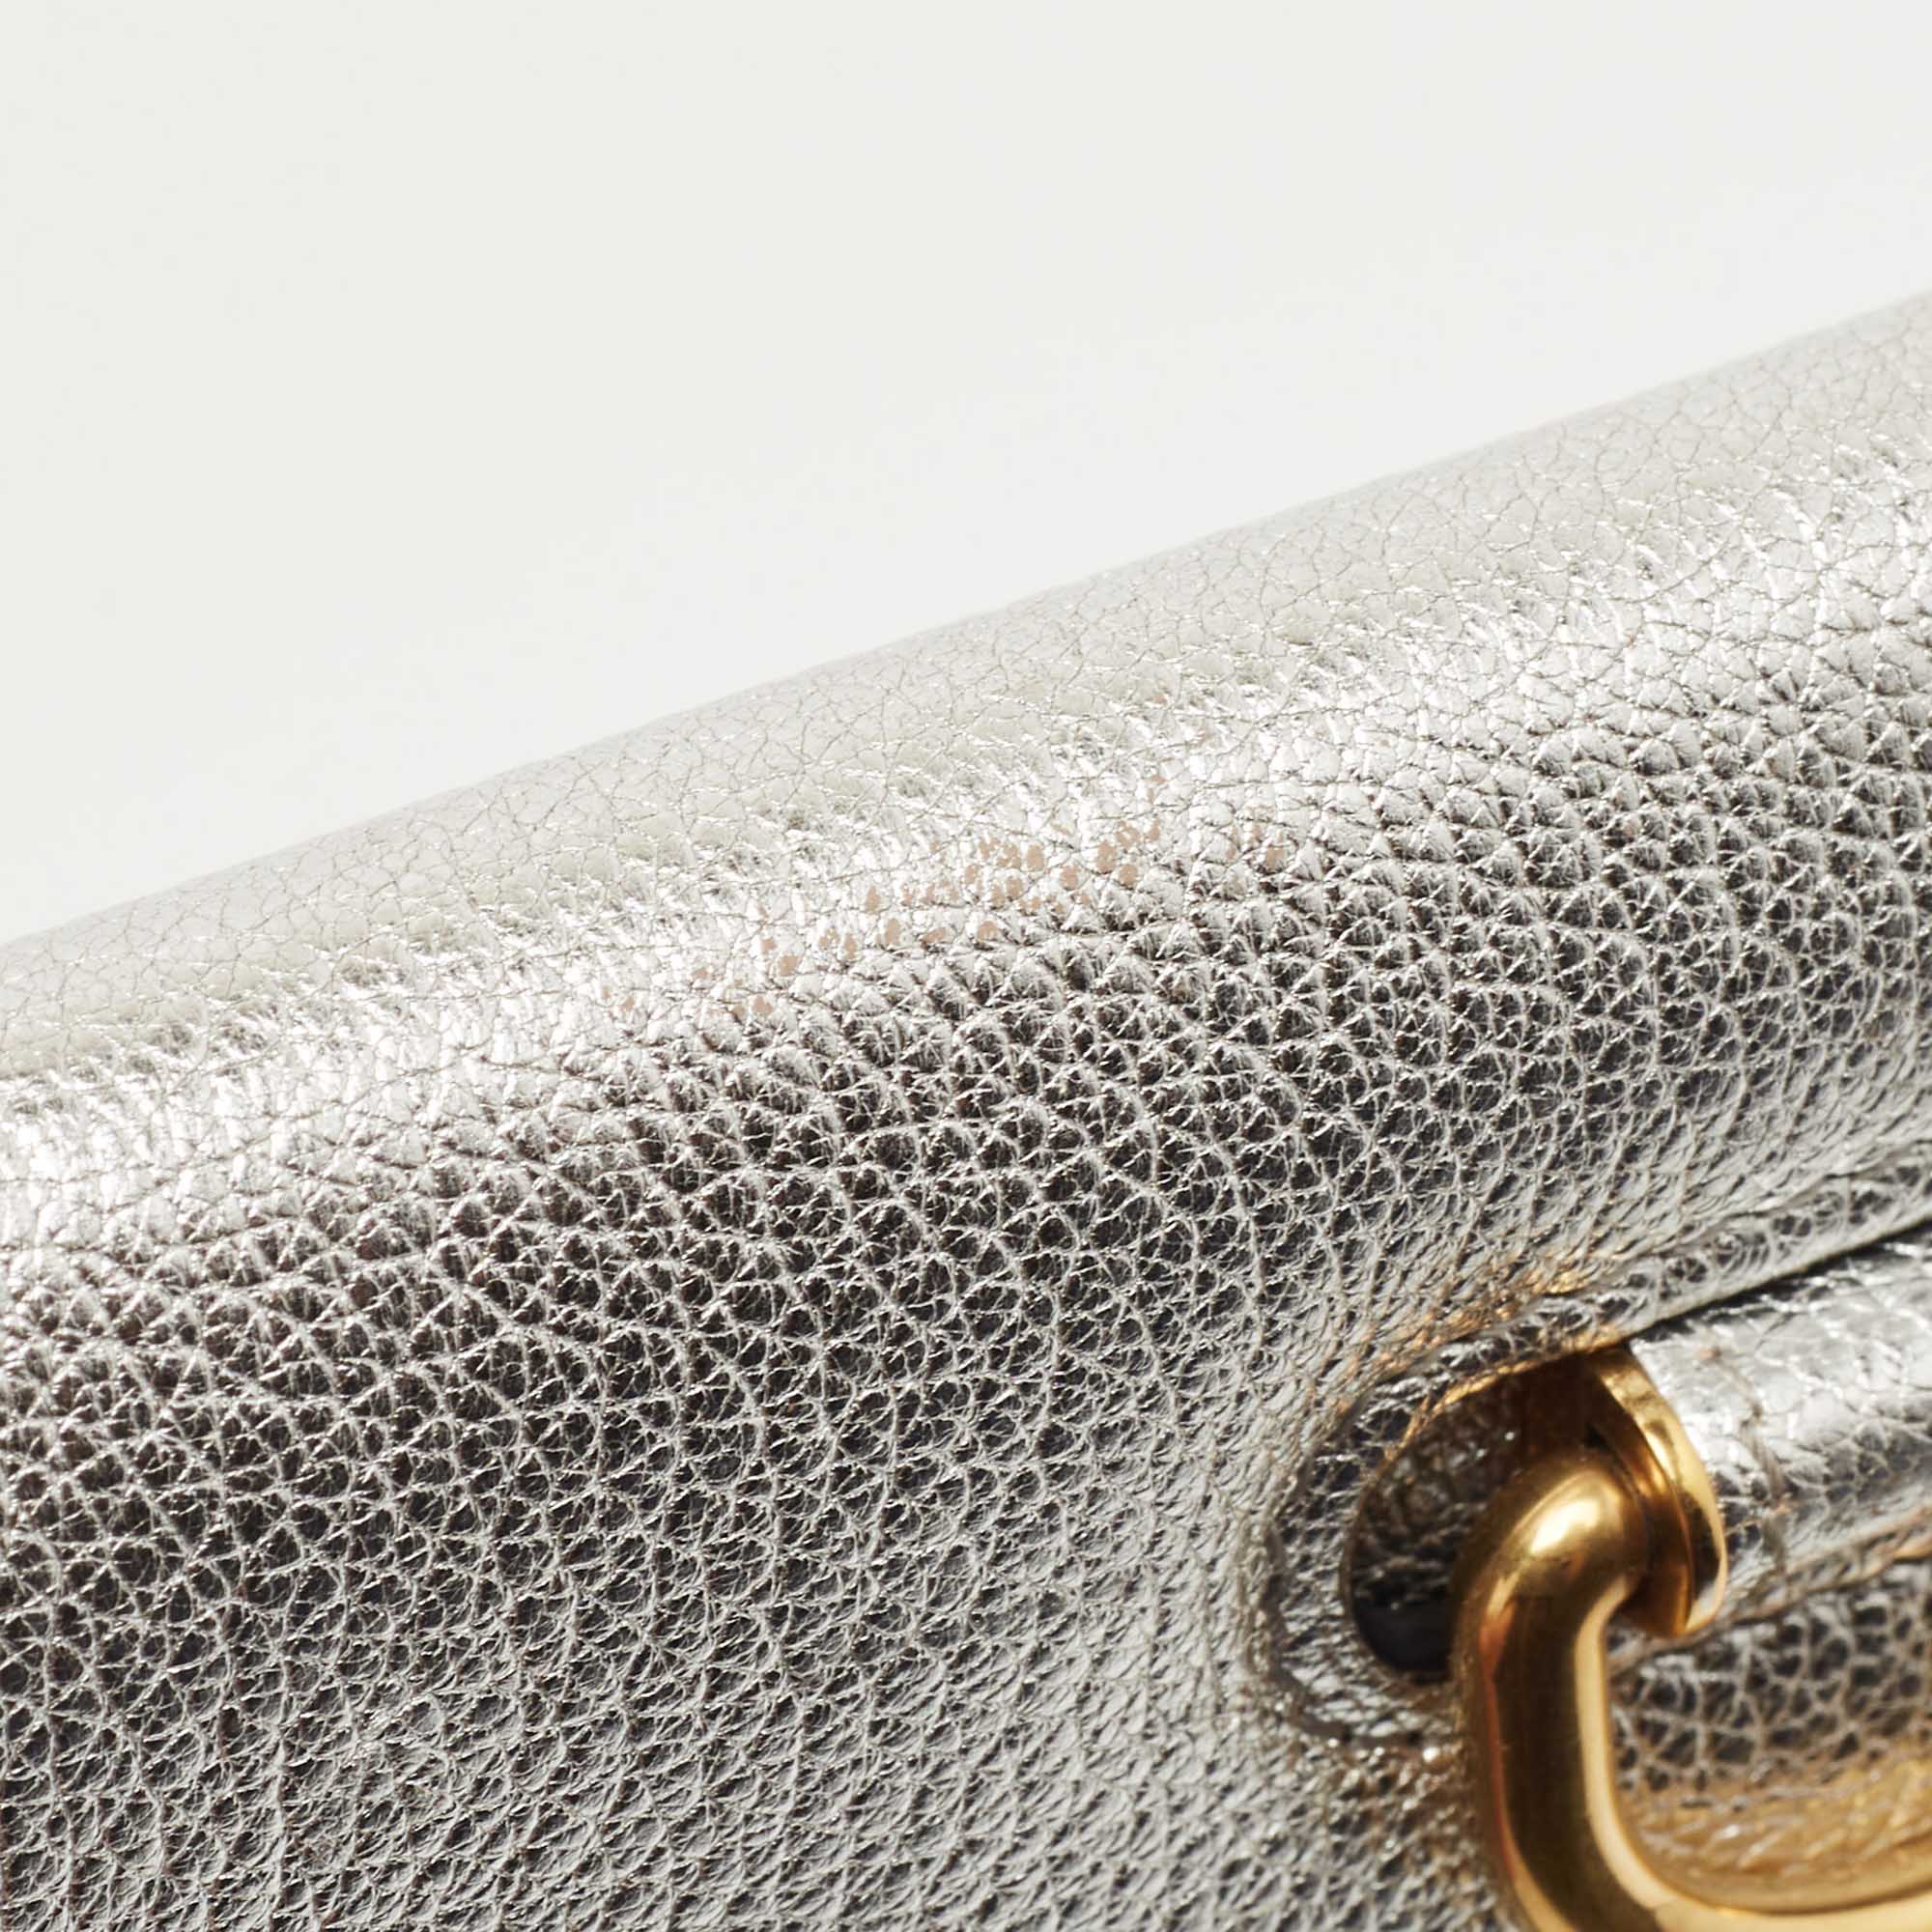 Burberry Silver Leather Highbury D-Ring Continental Wallet